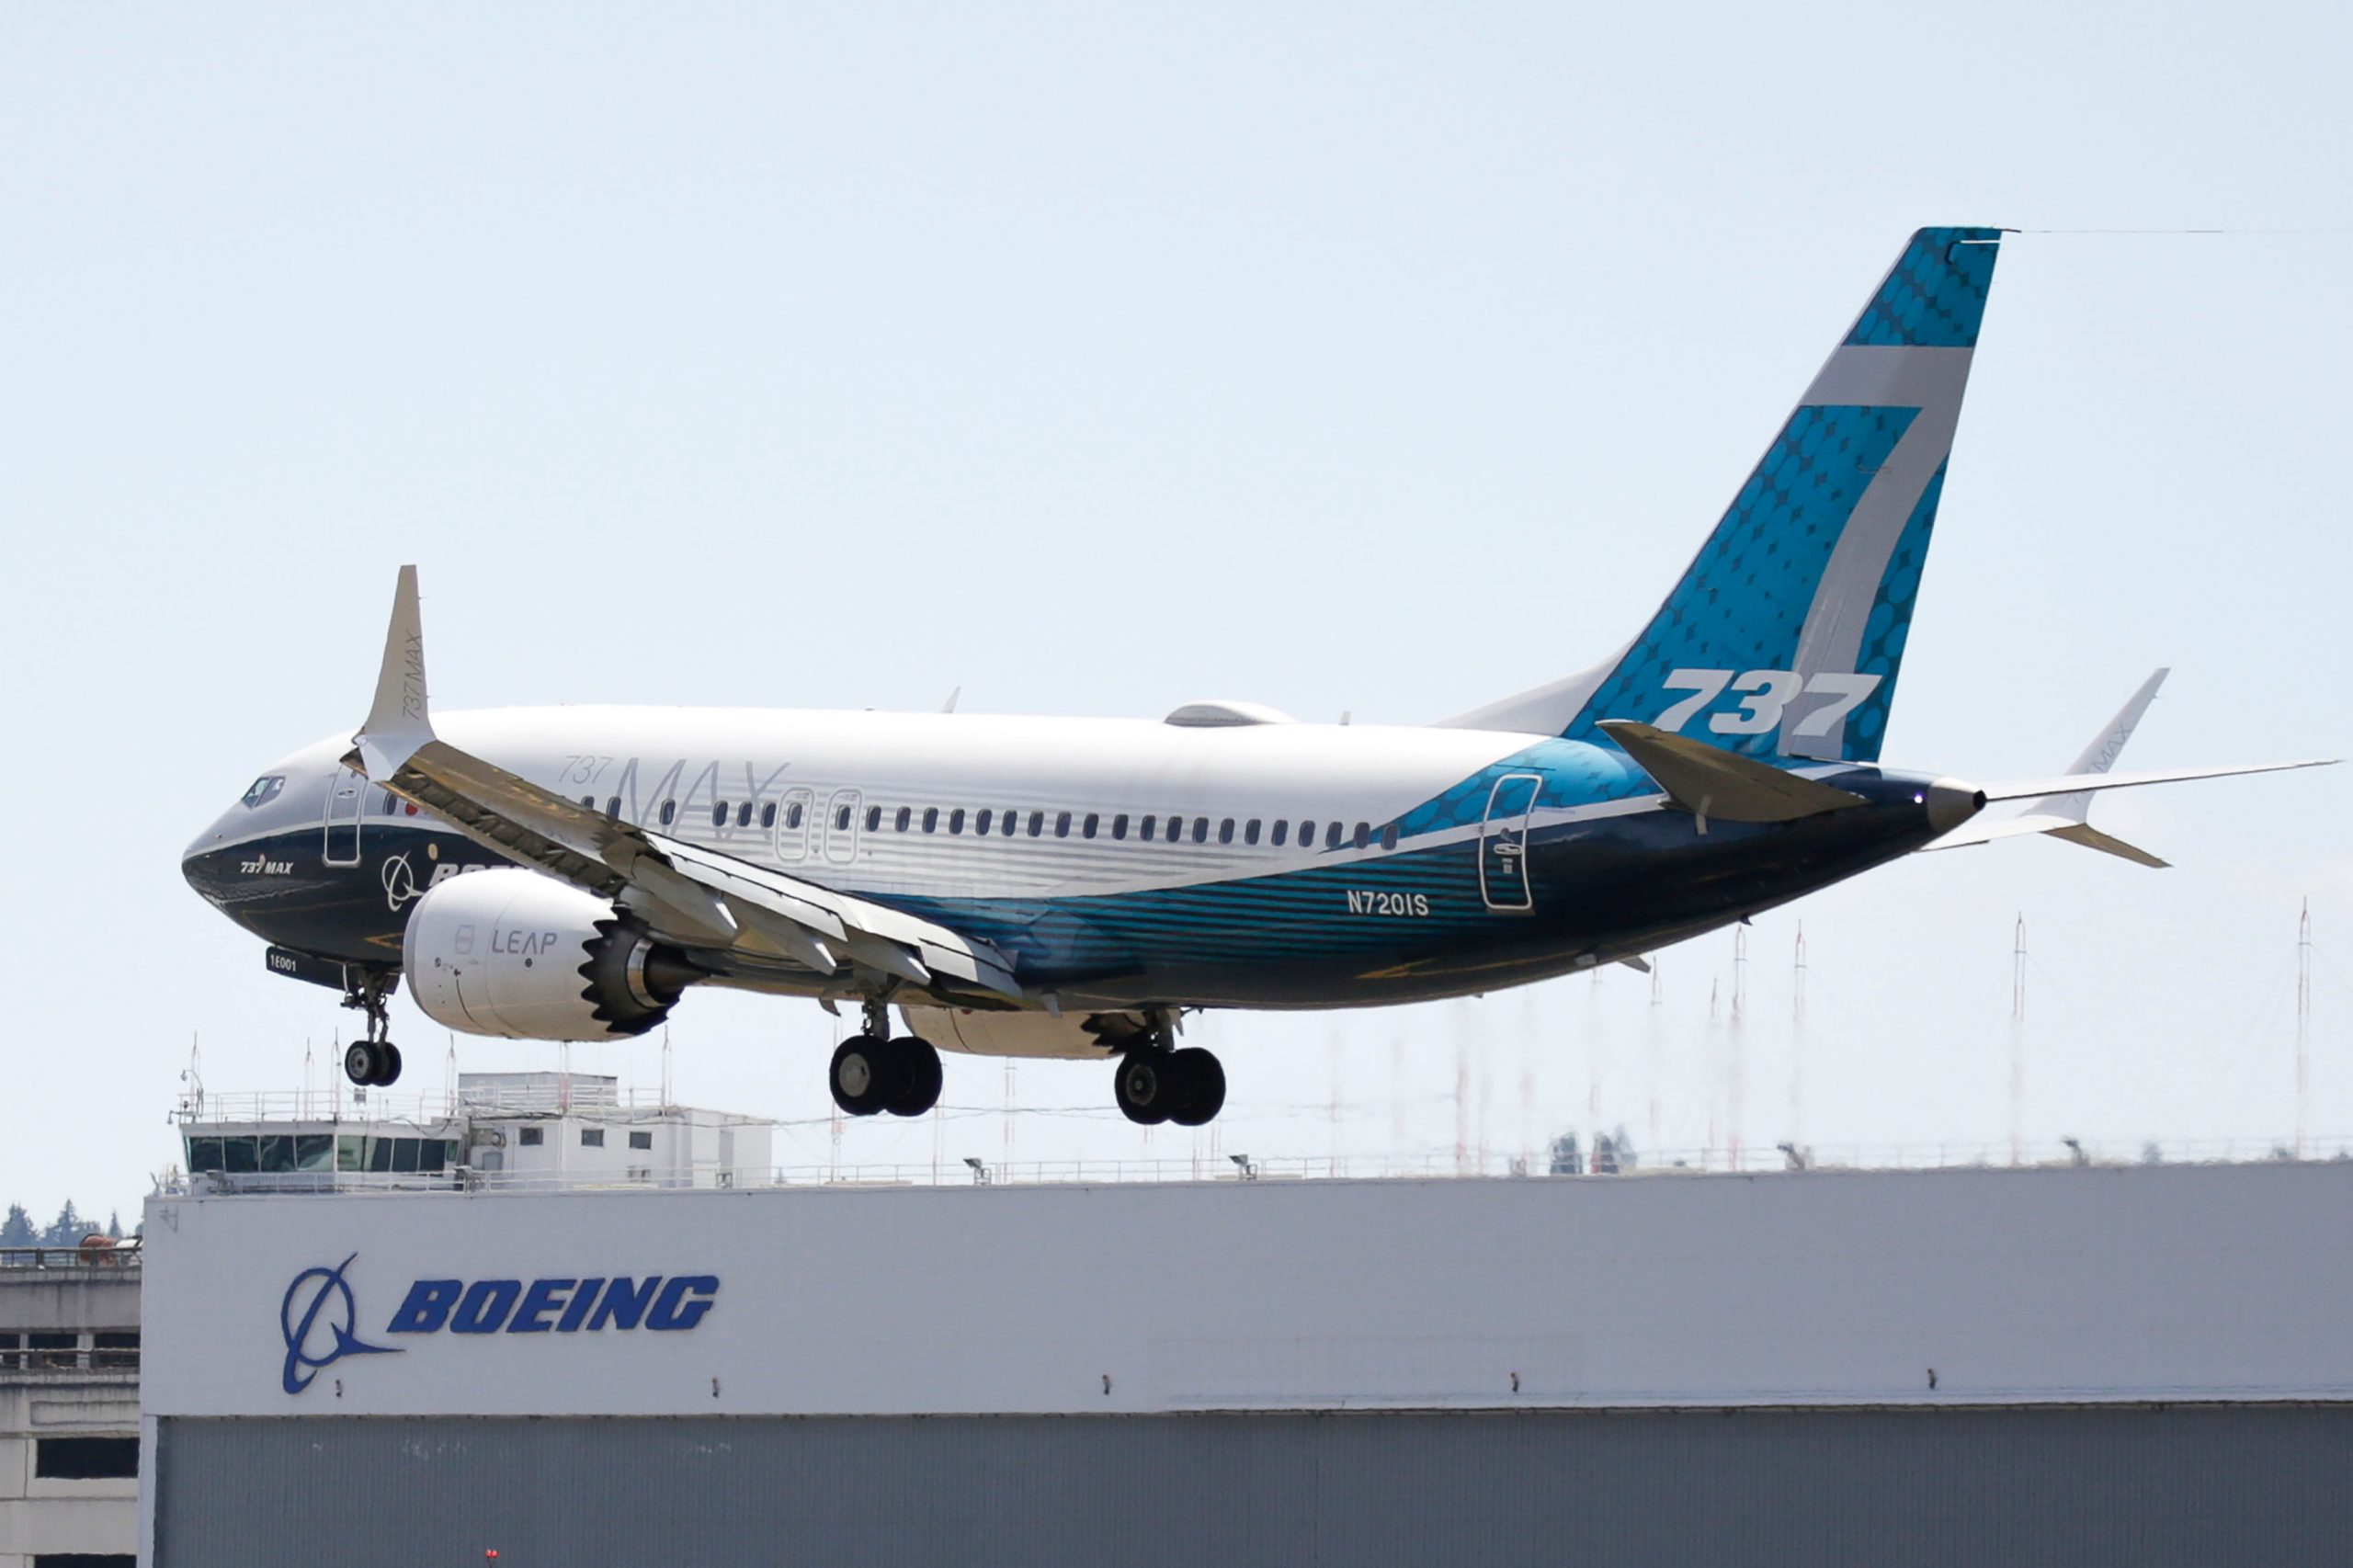 Pilots shut down Boeing 737 MAX engine due to ‘mechanical issue’, FAA to investigate